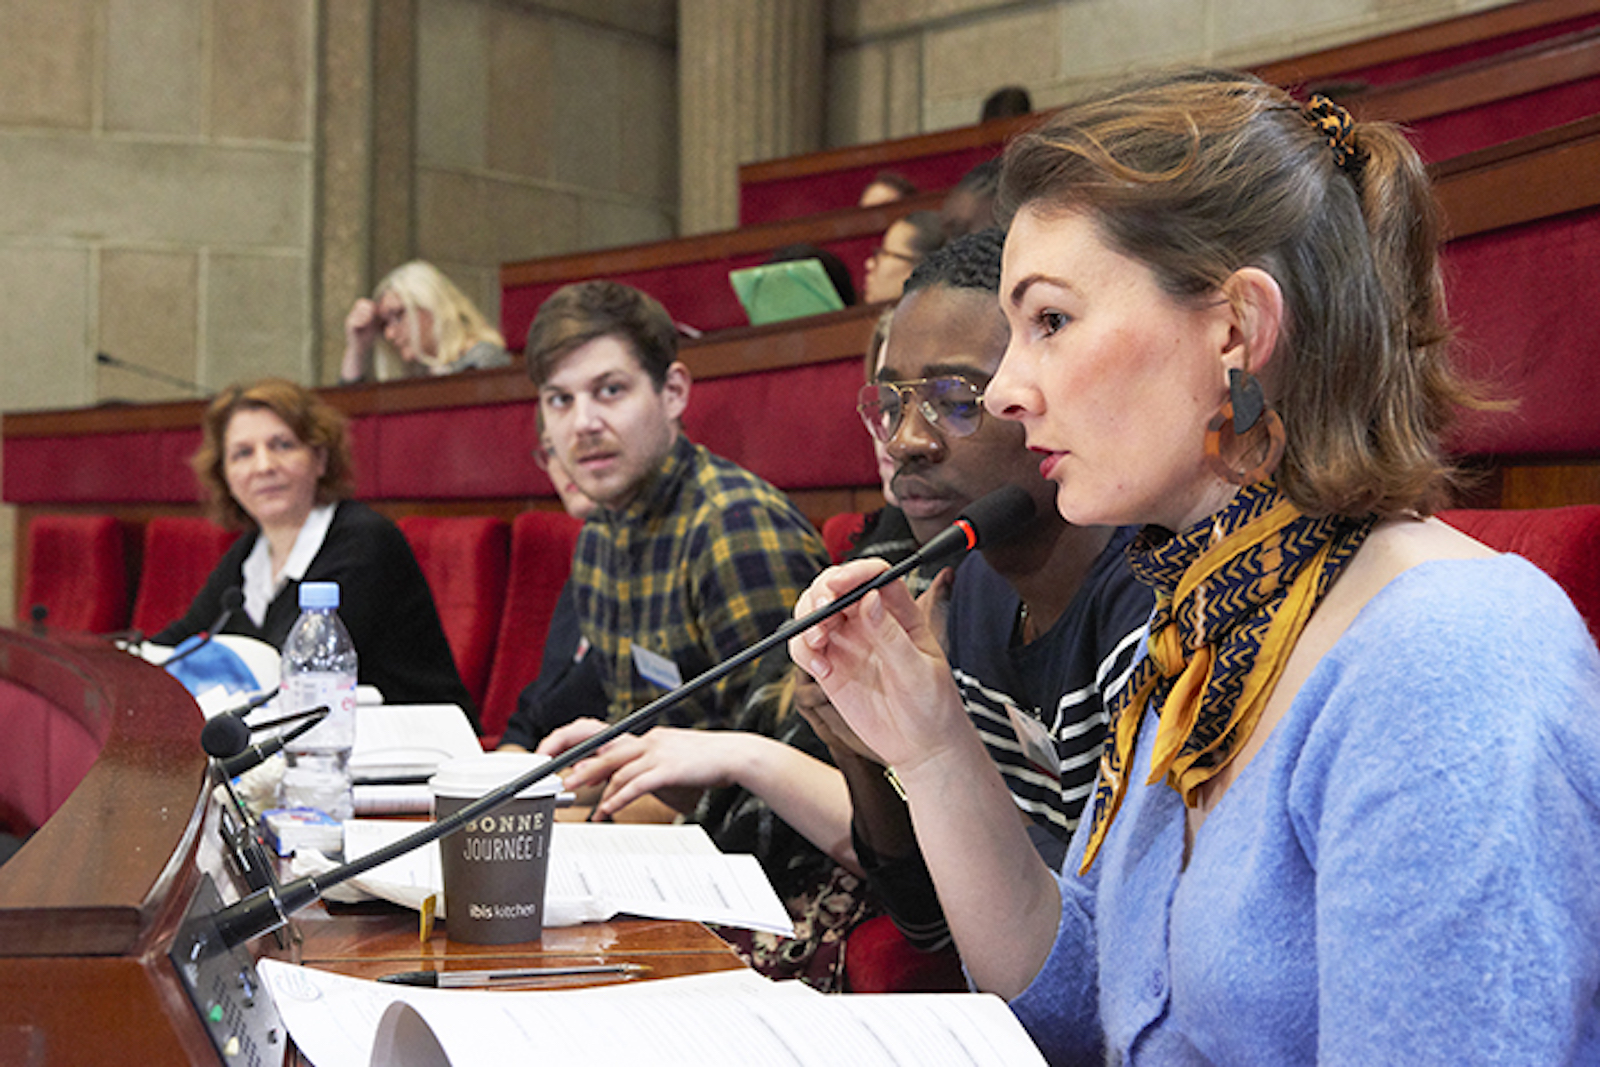 a woman in a blue sweater and yellow scarf holds a microphone as she speaks. She is seated next to several other people in red velvet chairs in a semicircular room